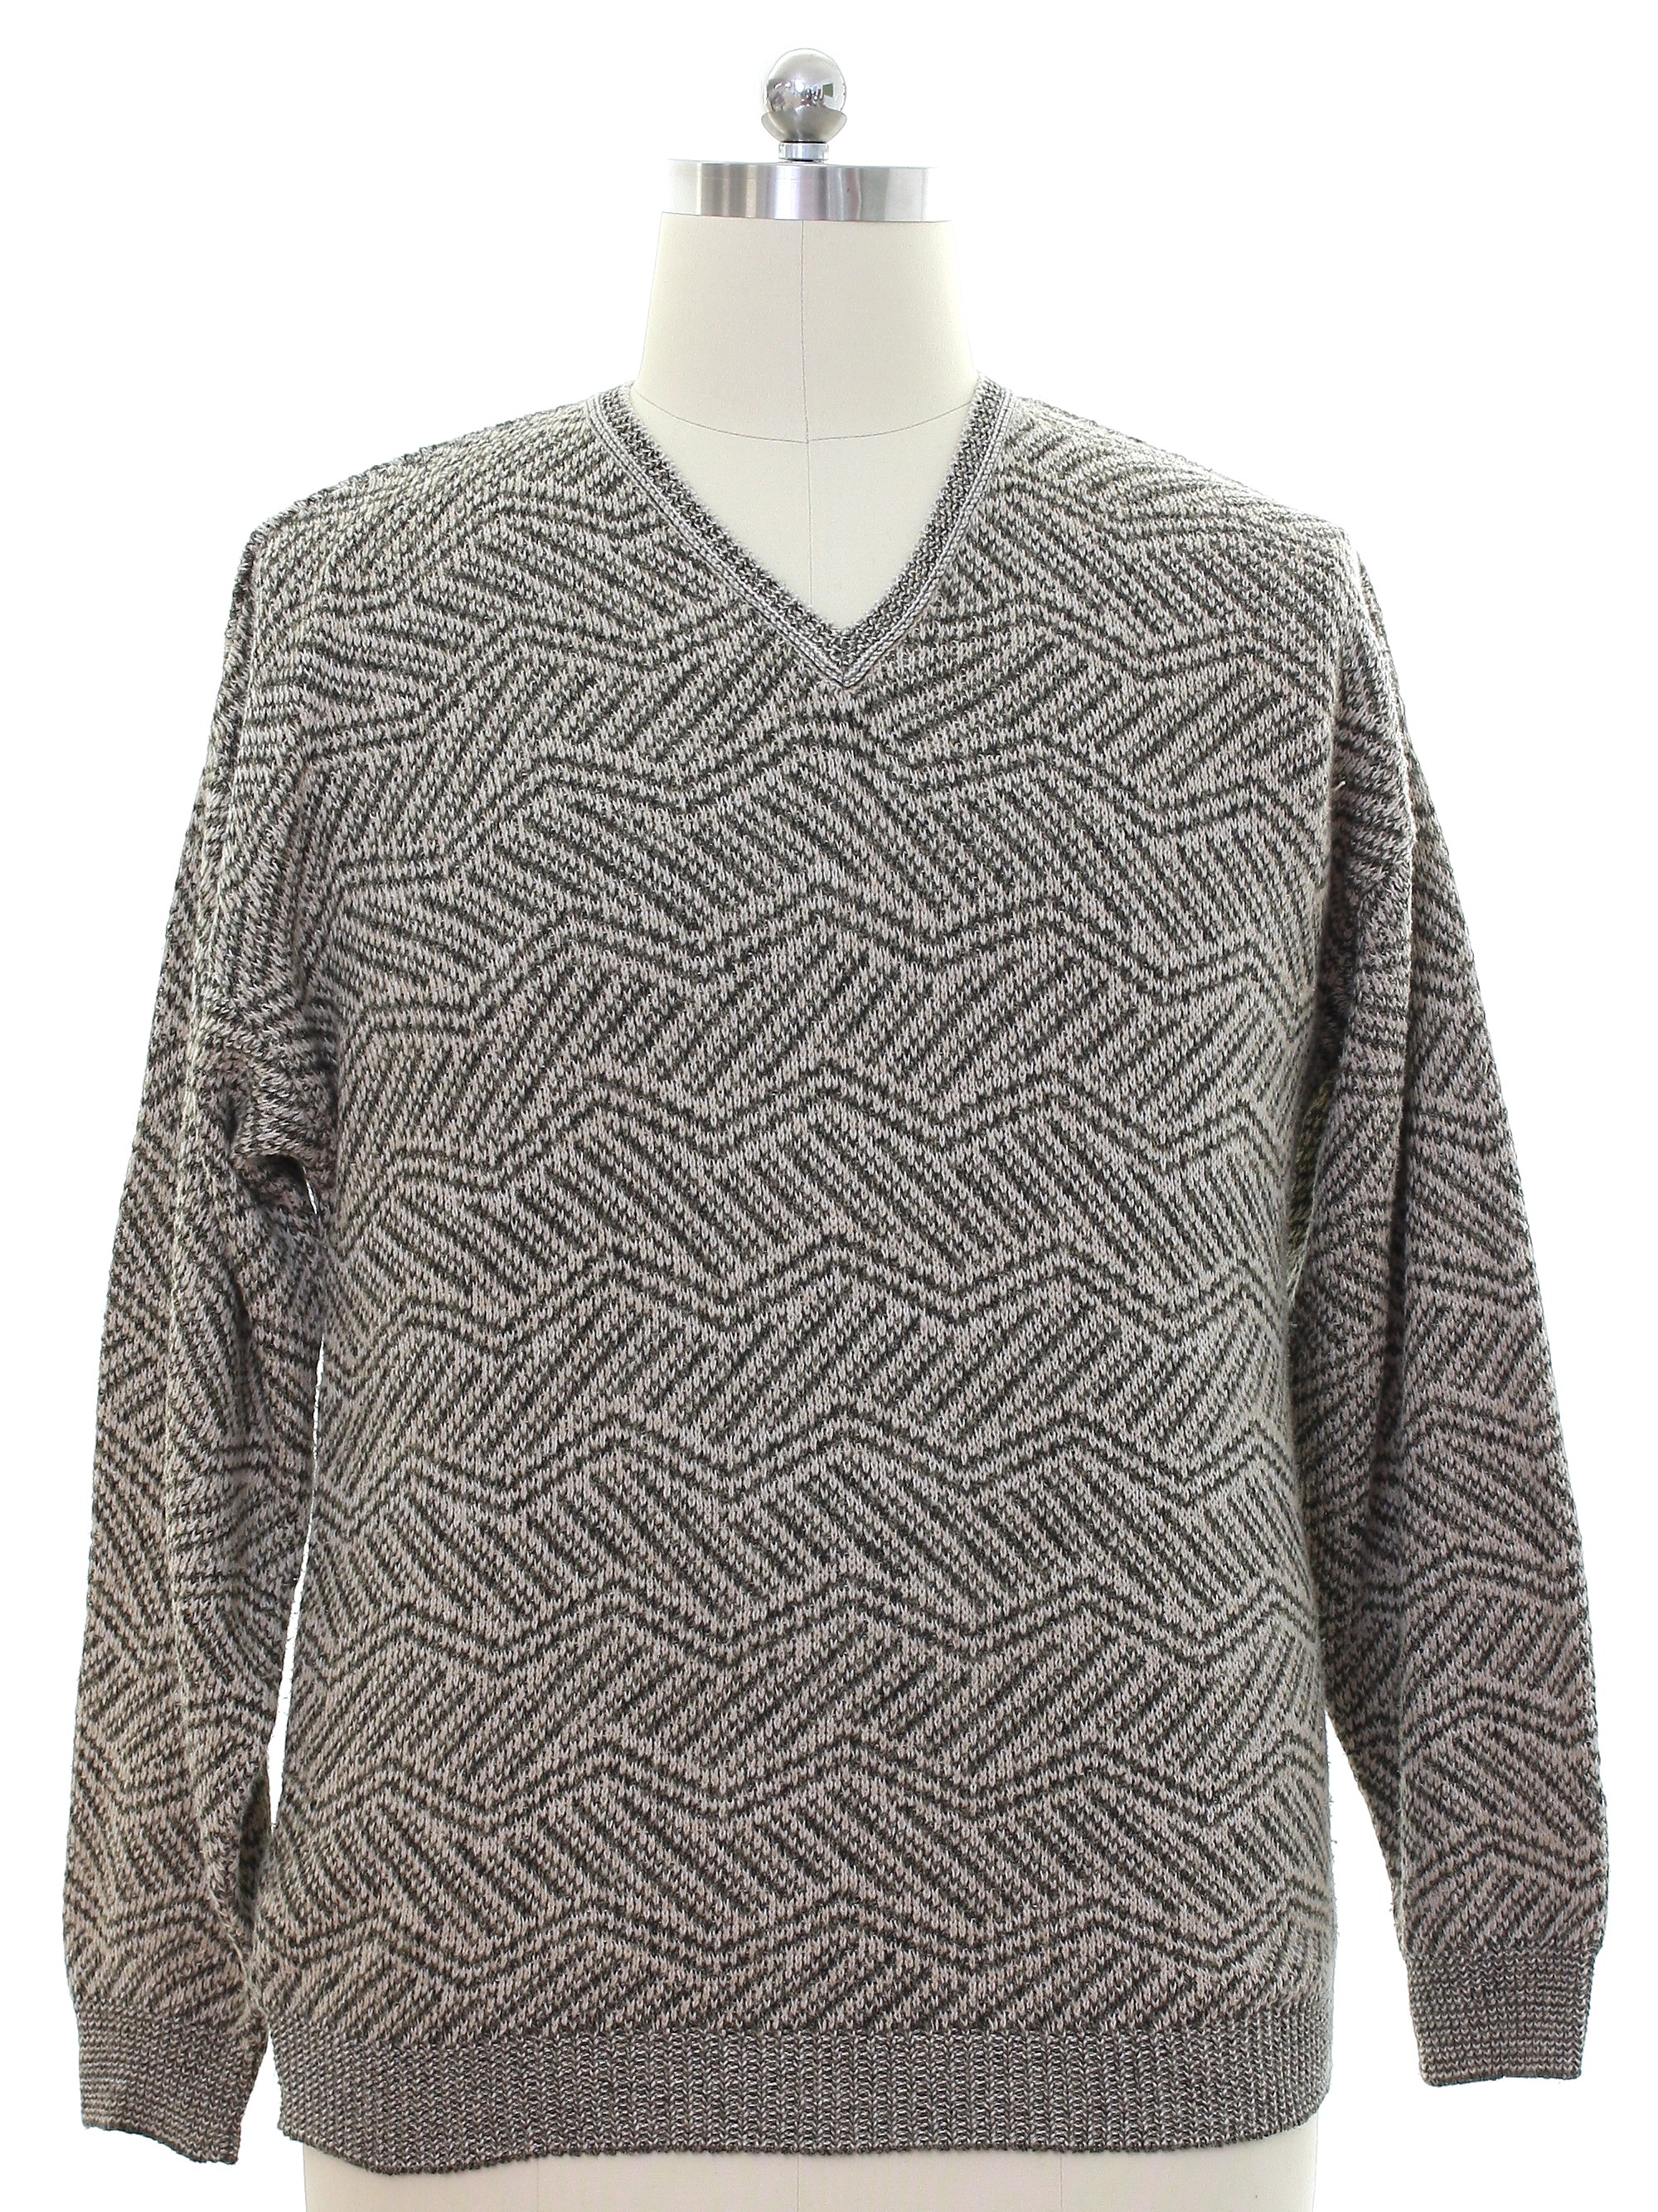 Sweater: 90s -Bachrach- Mens oatmeal background acrylic pullover ...